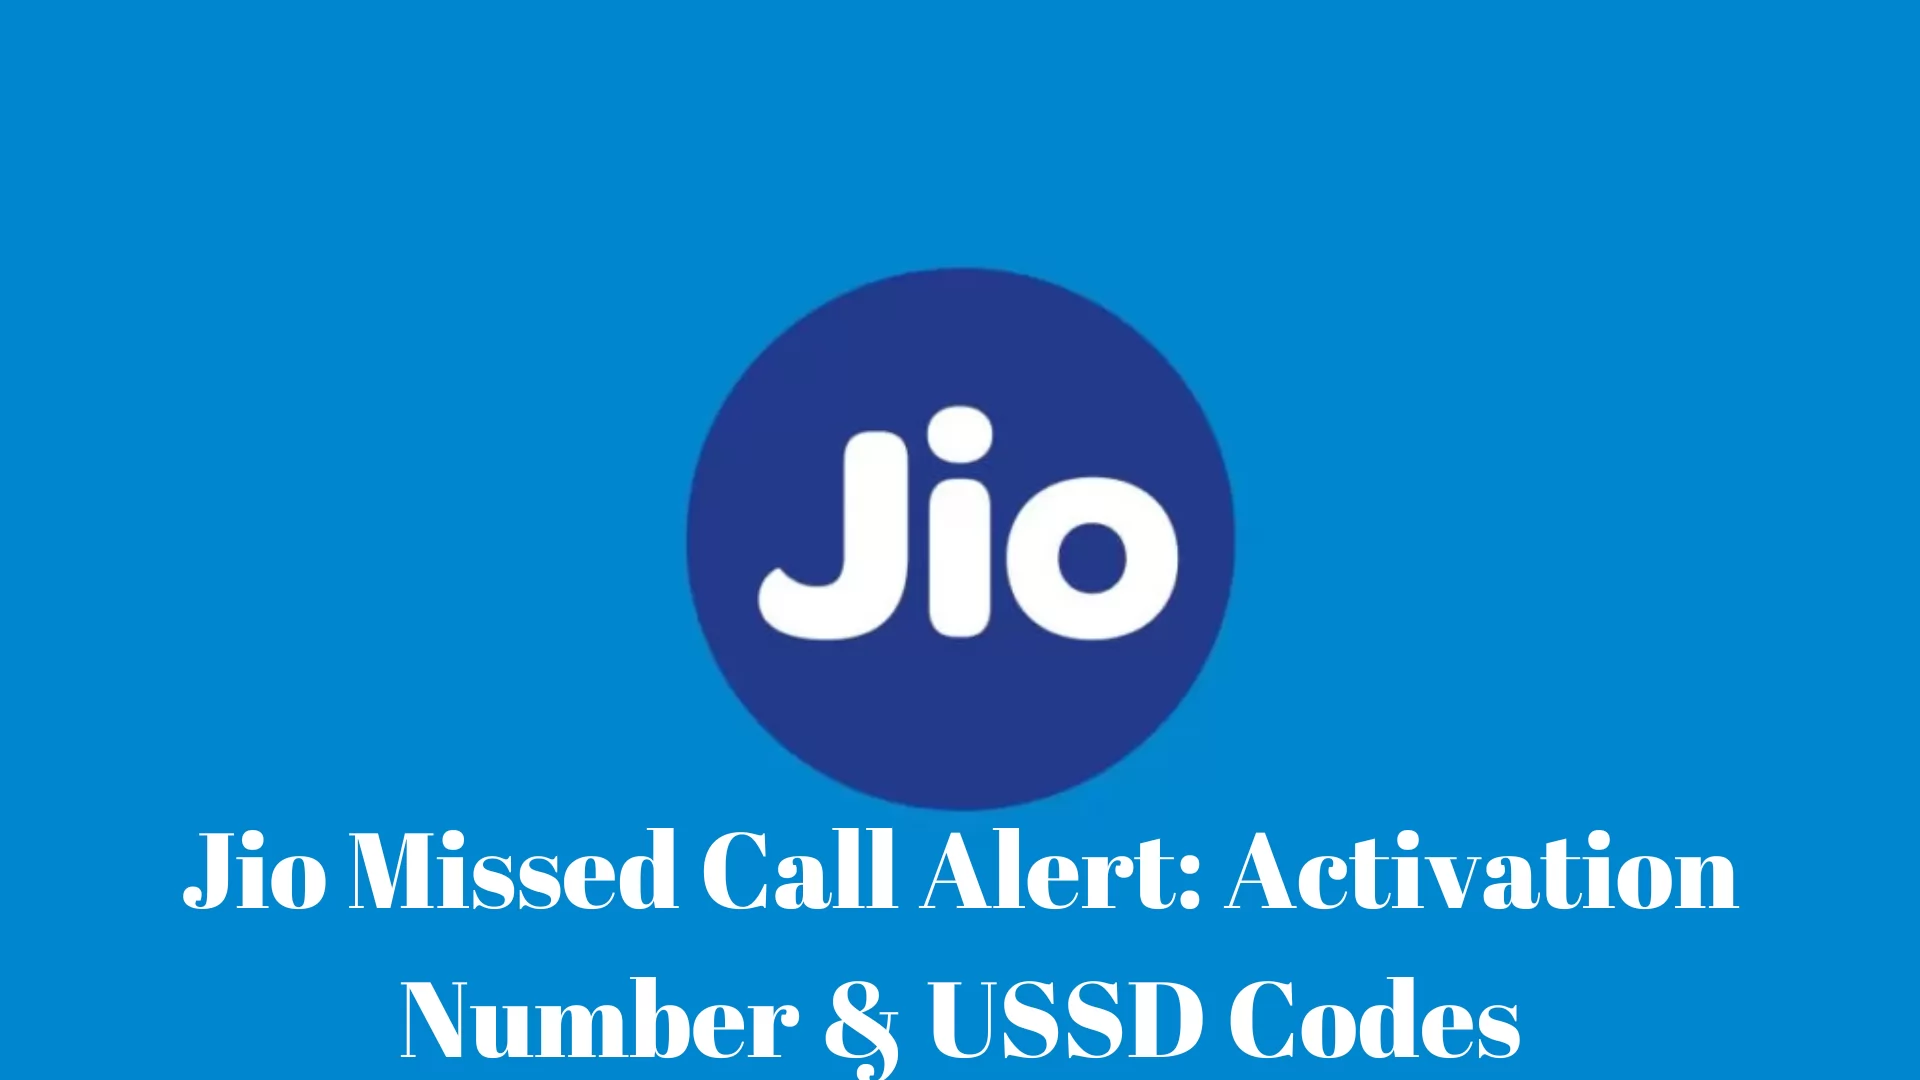 Jio Missed Call Alert: Activation Number & USSD Codes